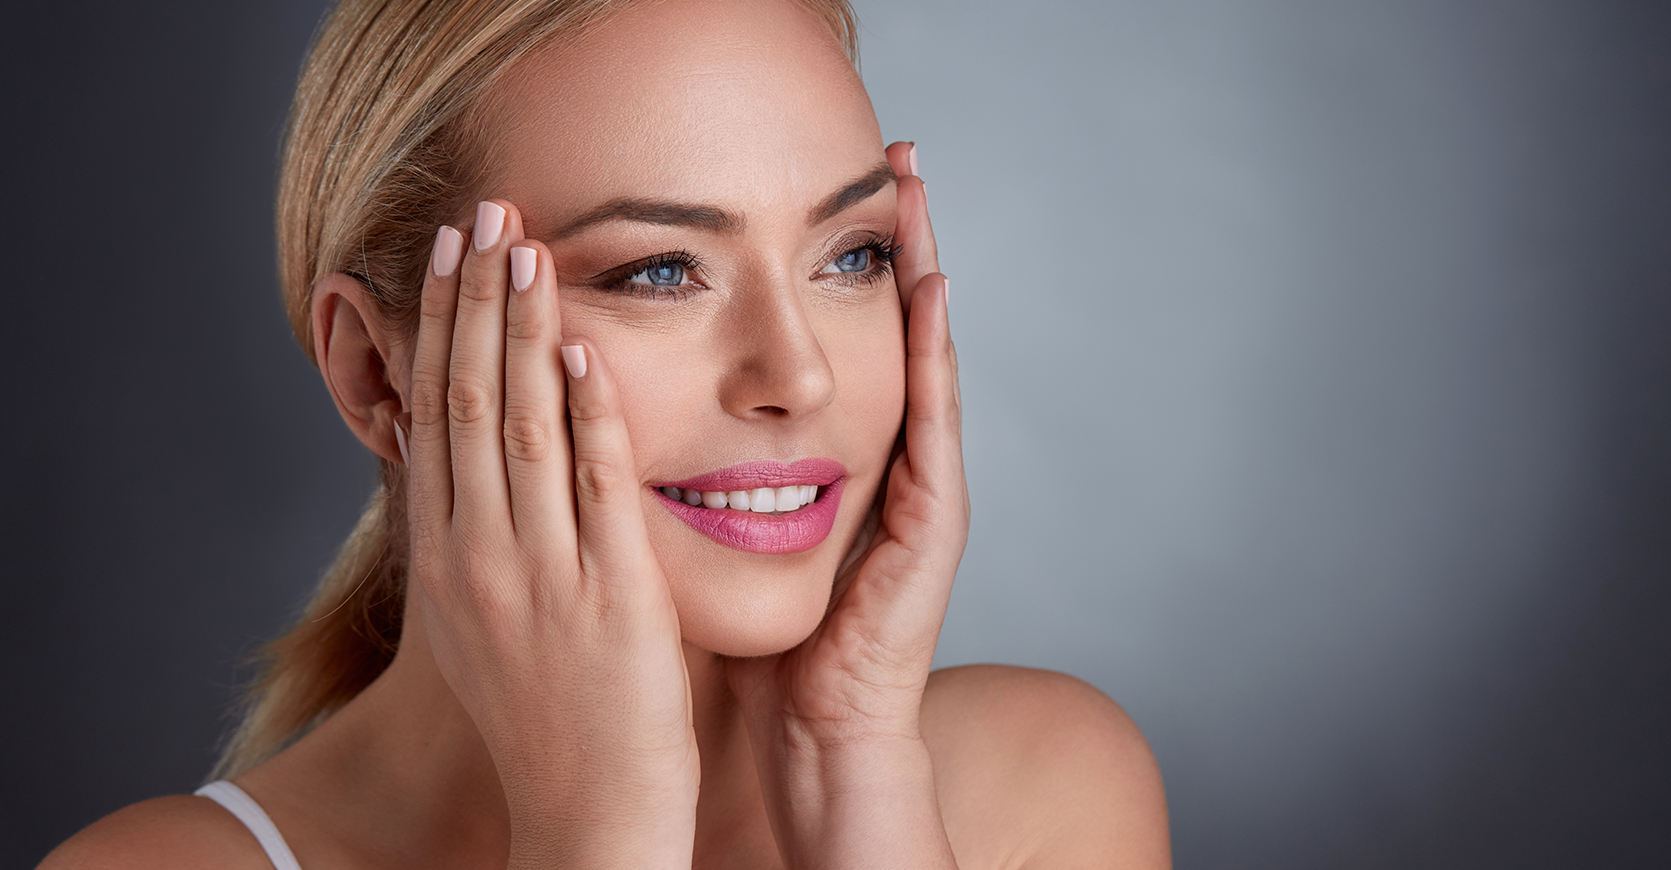 All You Need to Know About Radio Frequency Skin Tightening